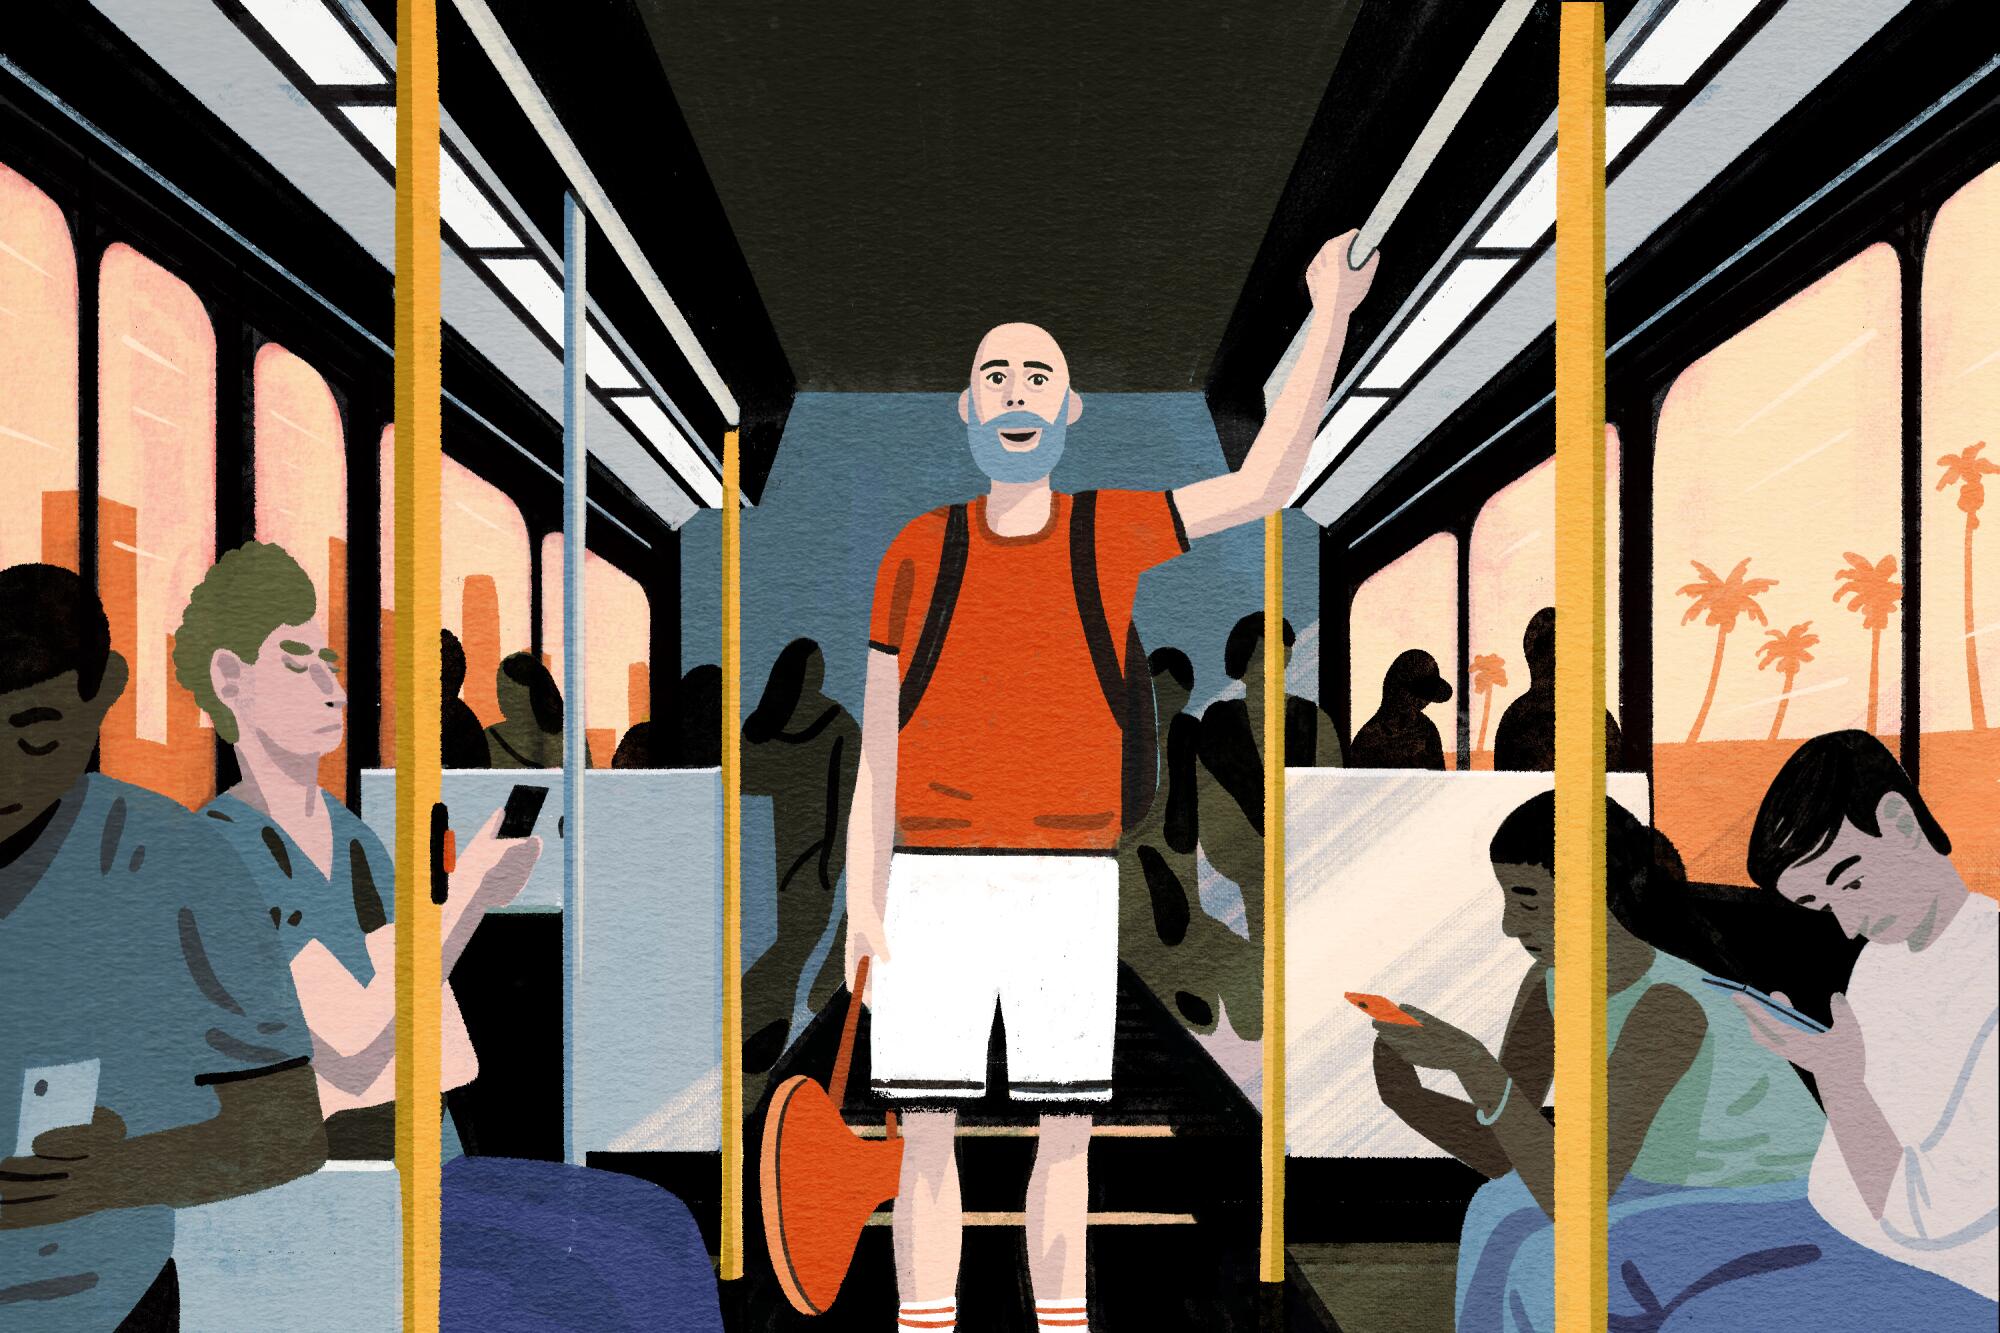 illustration showing the author riding the bus and holding a tennis racket in a case